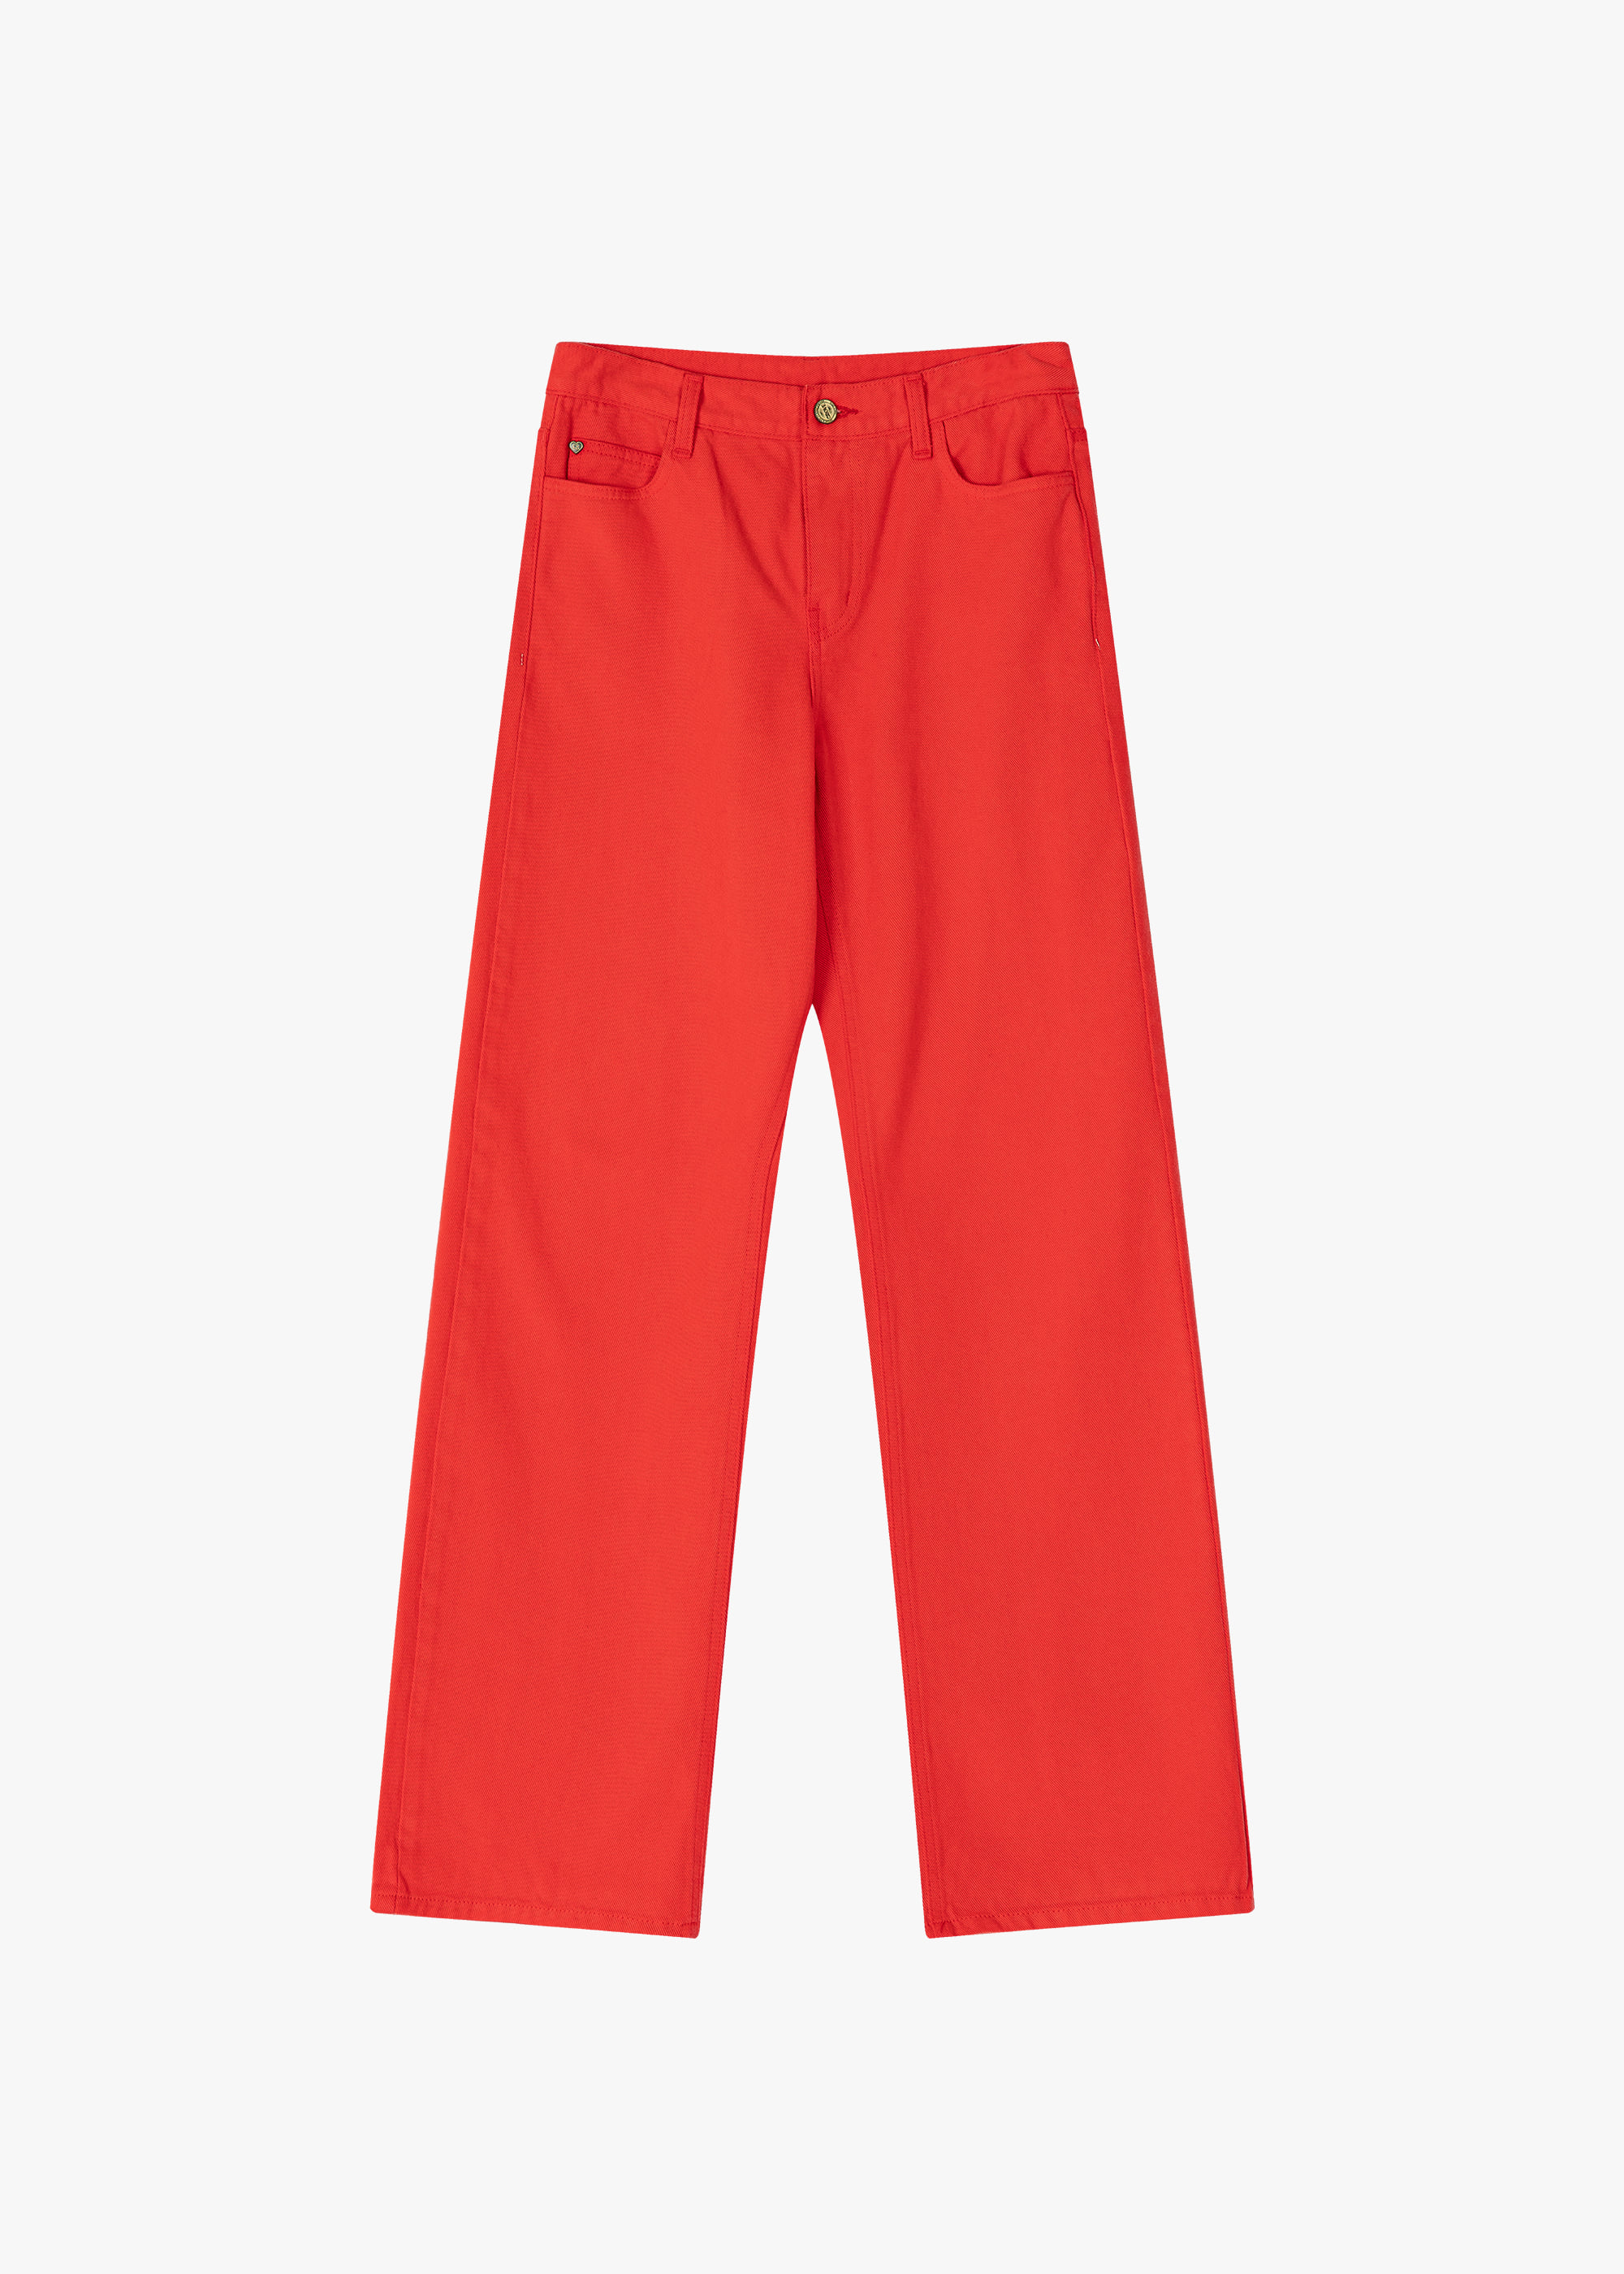 RIO PANTS [RED]